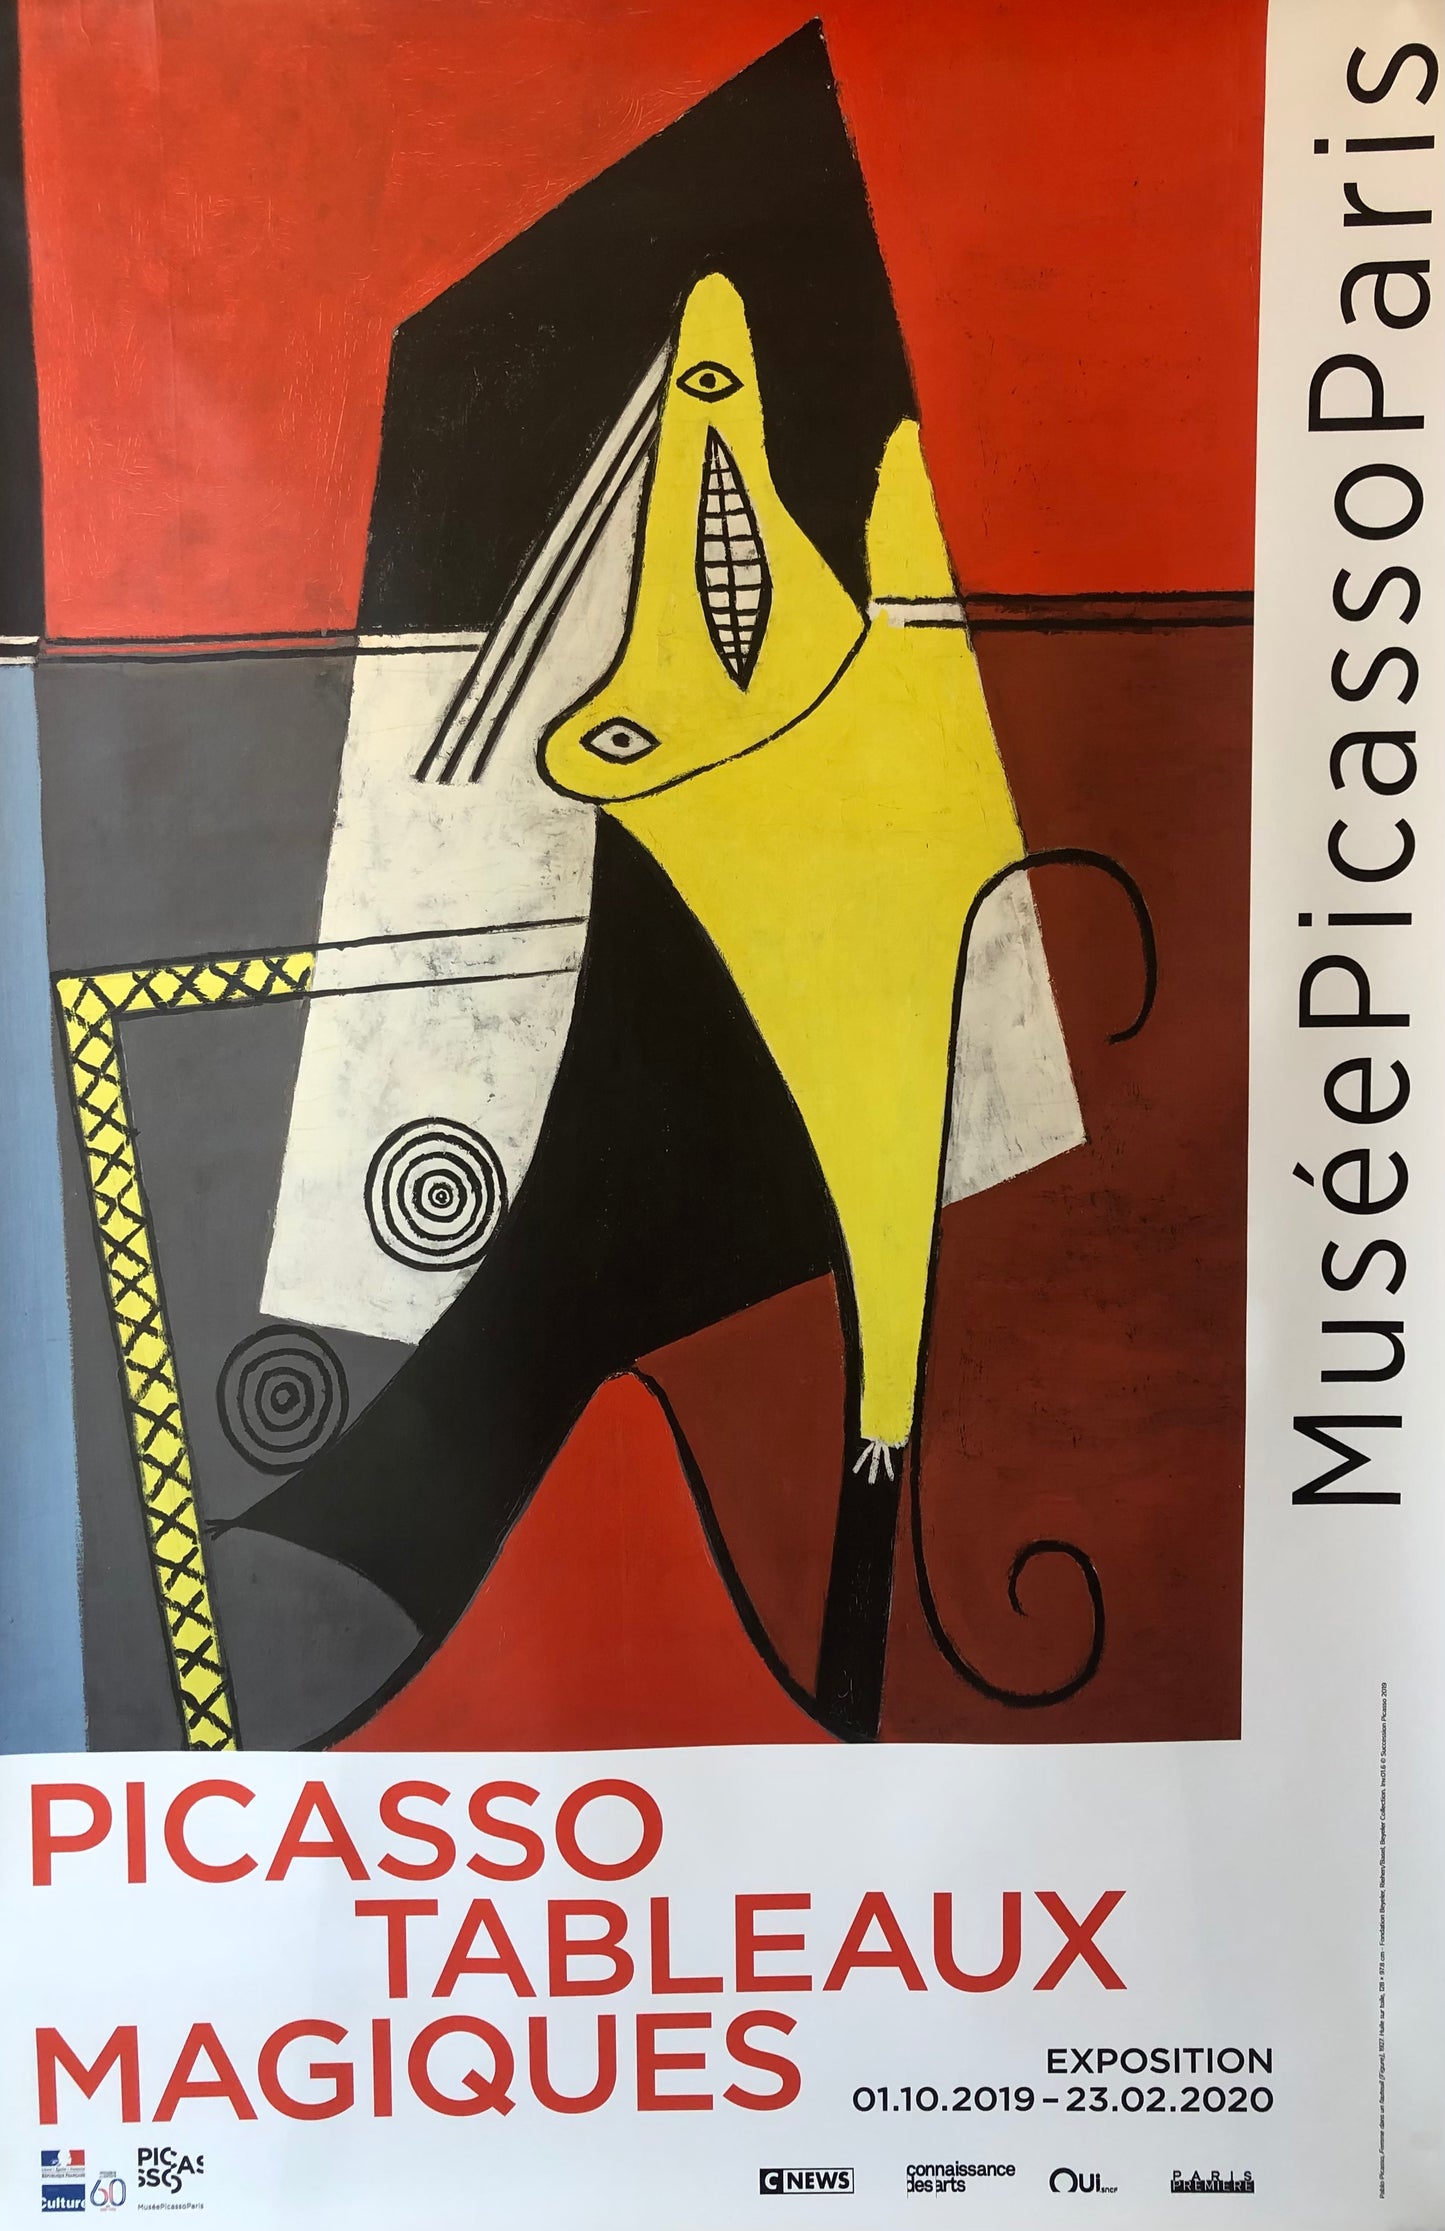 Mussee Picasso Paris Exhibition Poster